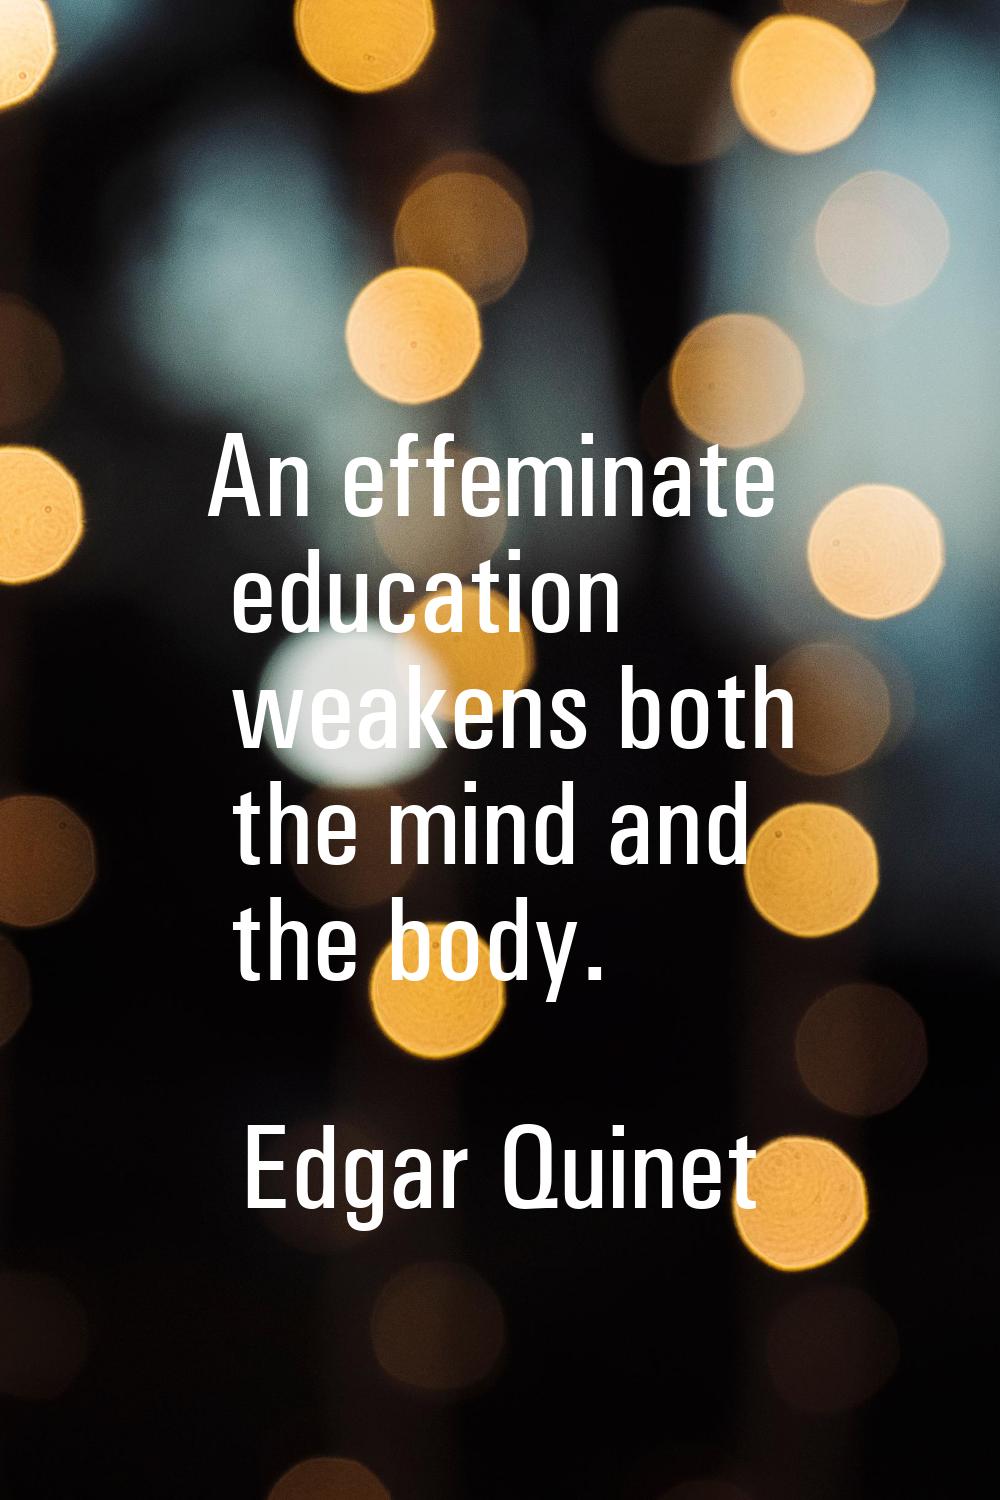 An effeminate education weakens both the mind and the body.